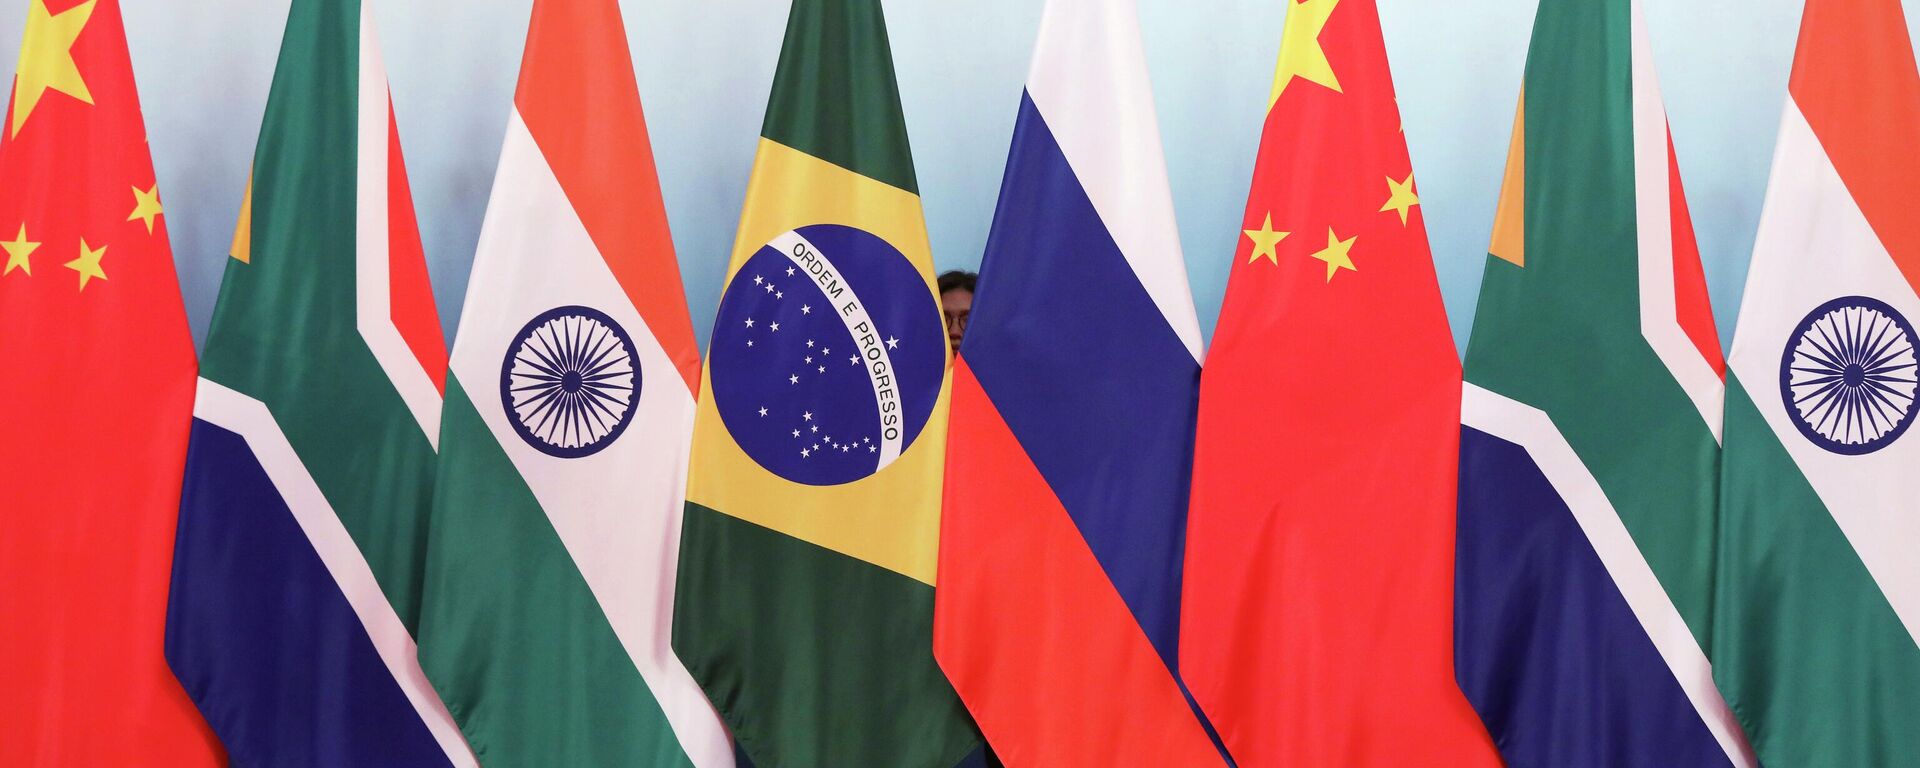 Staff worker stands behind national flags of Brazil, Russia, China, South Africa and India to tidy the flags ahead of a group photo during the BRICS Summit at the Xiamen International Conference and Exhibition Center in Xiamen, southeastern China's Fujian Province, Monday, Sept. 4, 2017. - Sputnik International, 1920, 02.06.2023